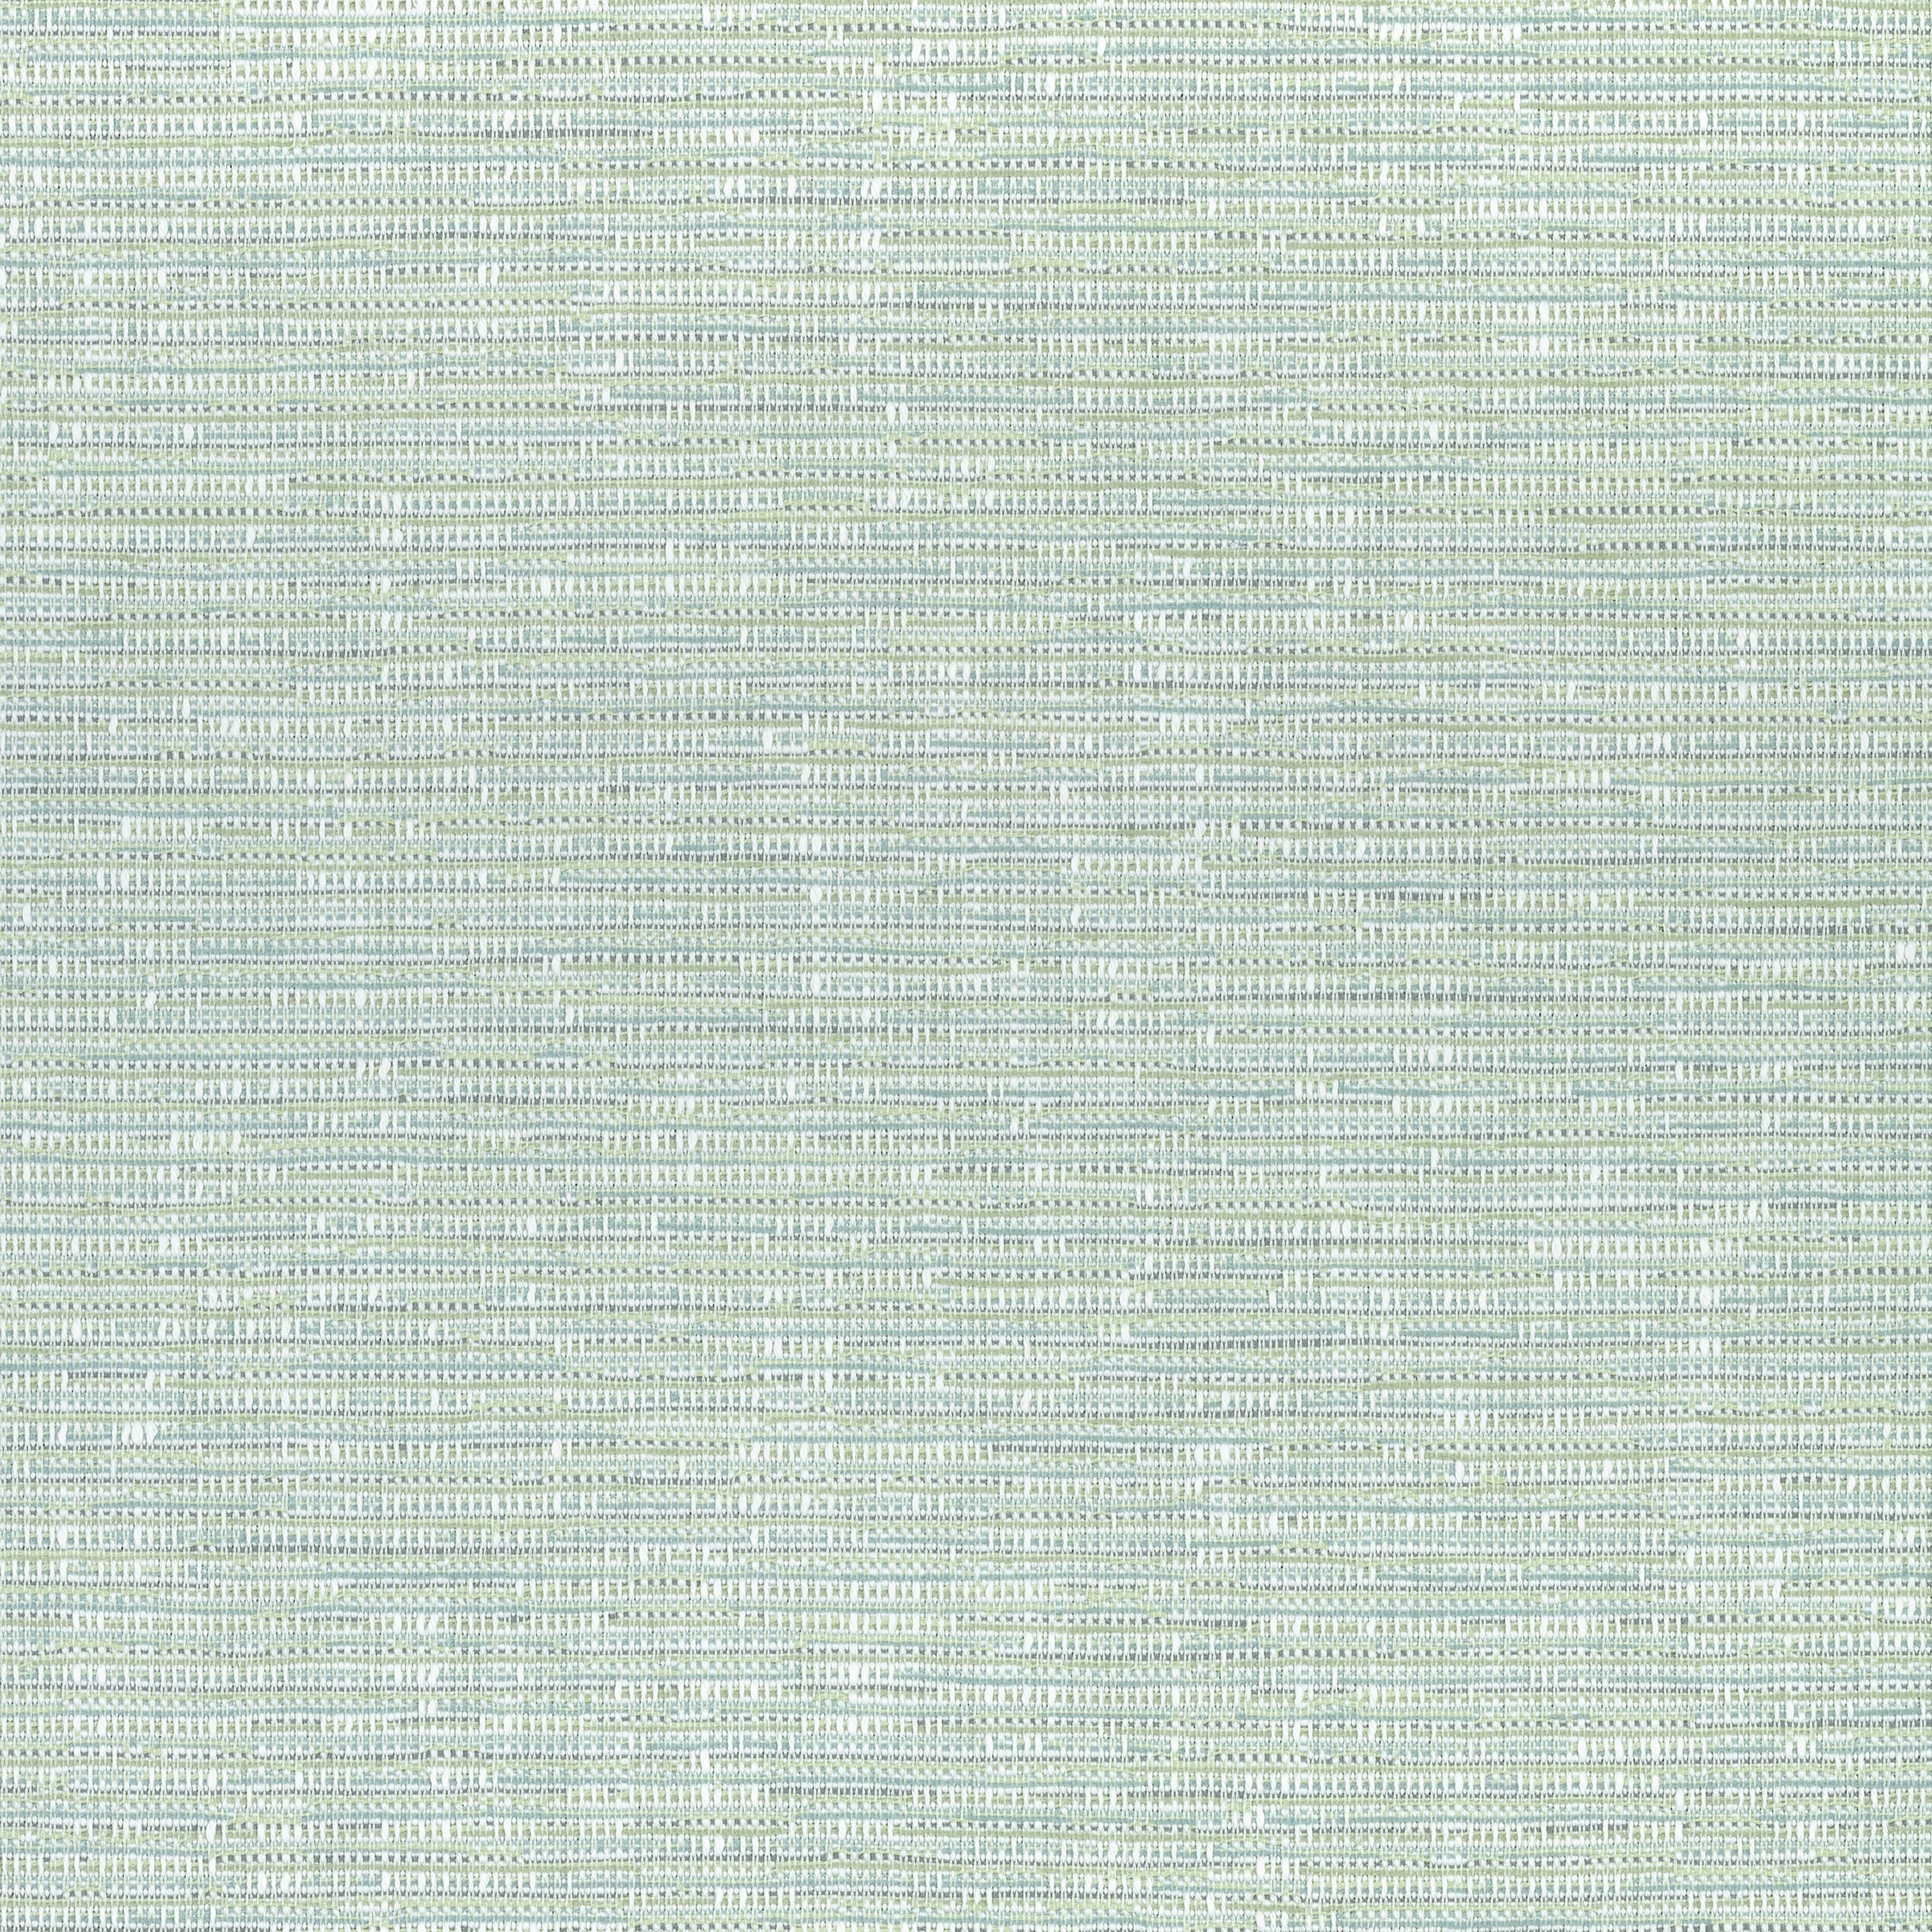 Cadence fabric in seafoam color - pattern number W74042 - by Thibaut in the Cadence collection